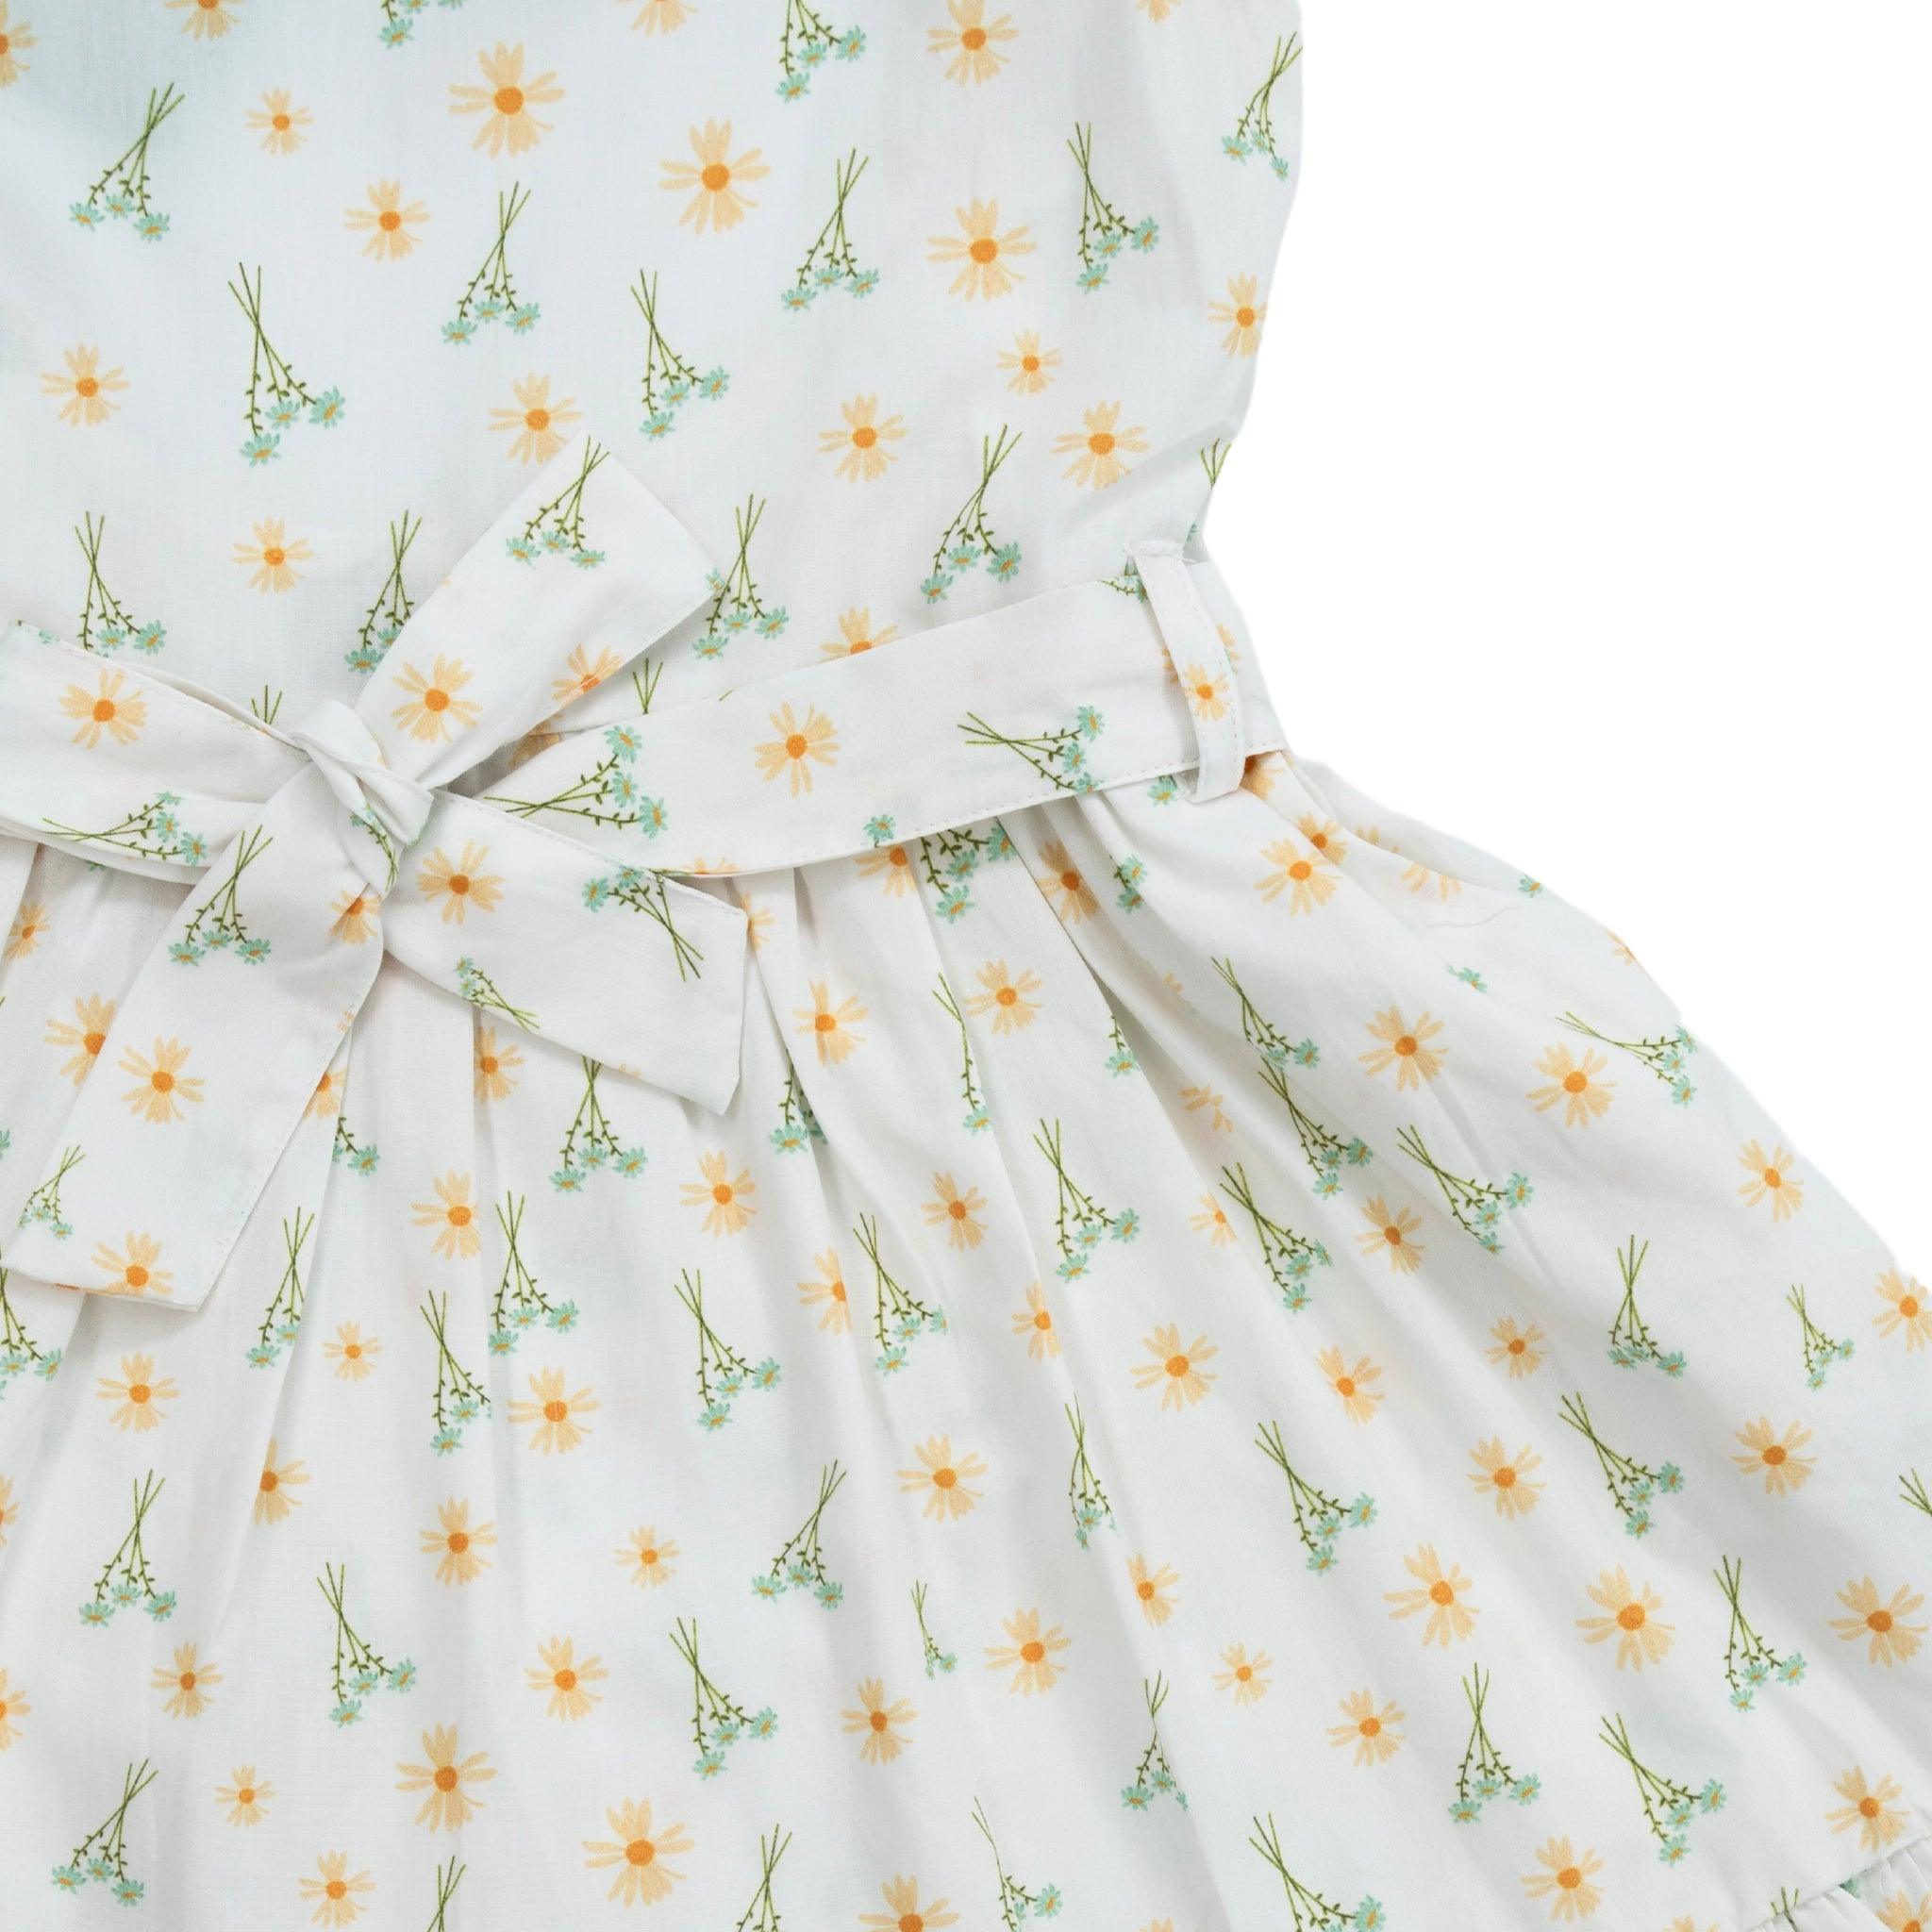 Close-up of a Karee Petite Blossom Cotton Dress in Smoked Pearl with a bow at the waist, featuring a pattern of yellow flowers and green sprigs on white fabric.